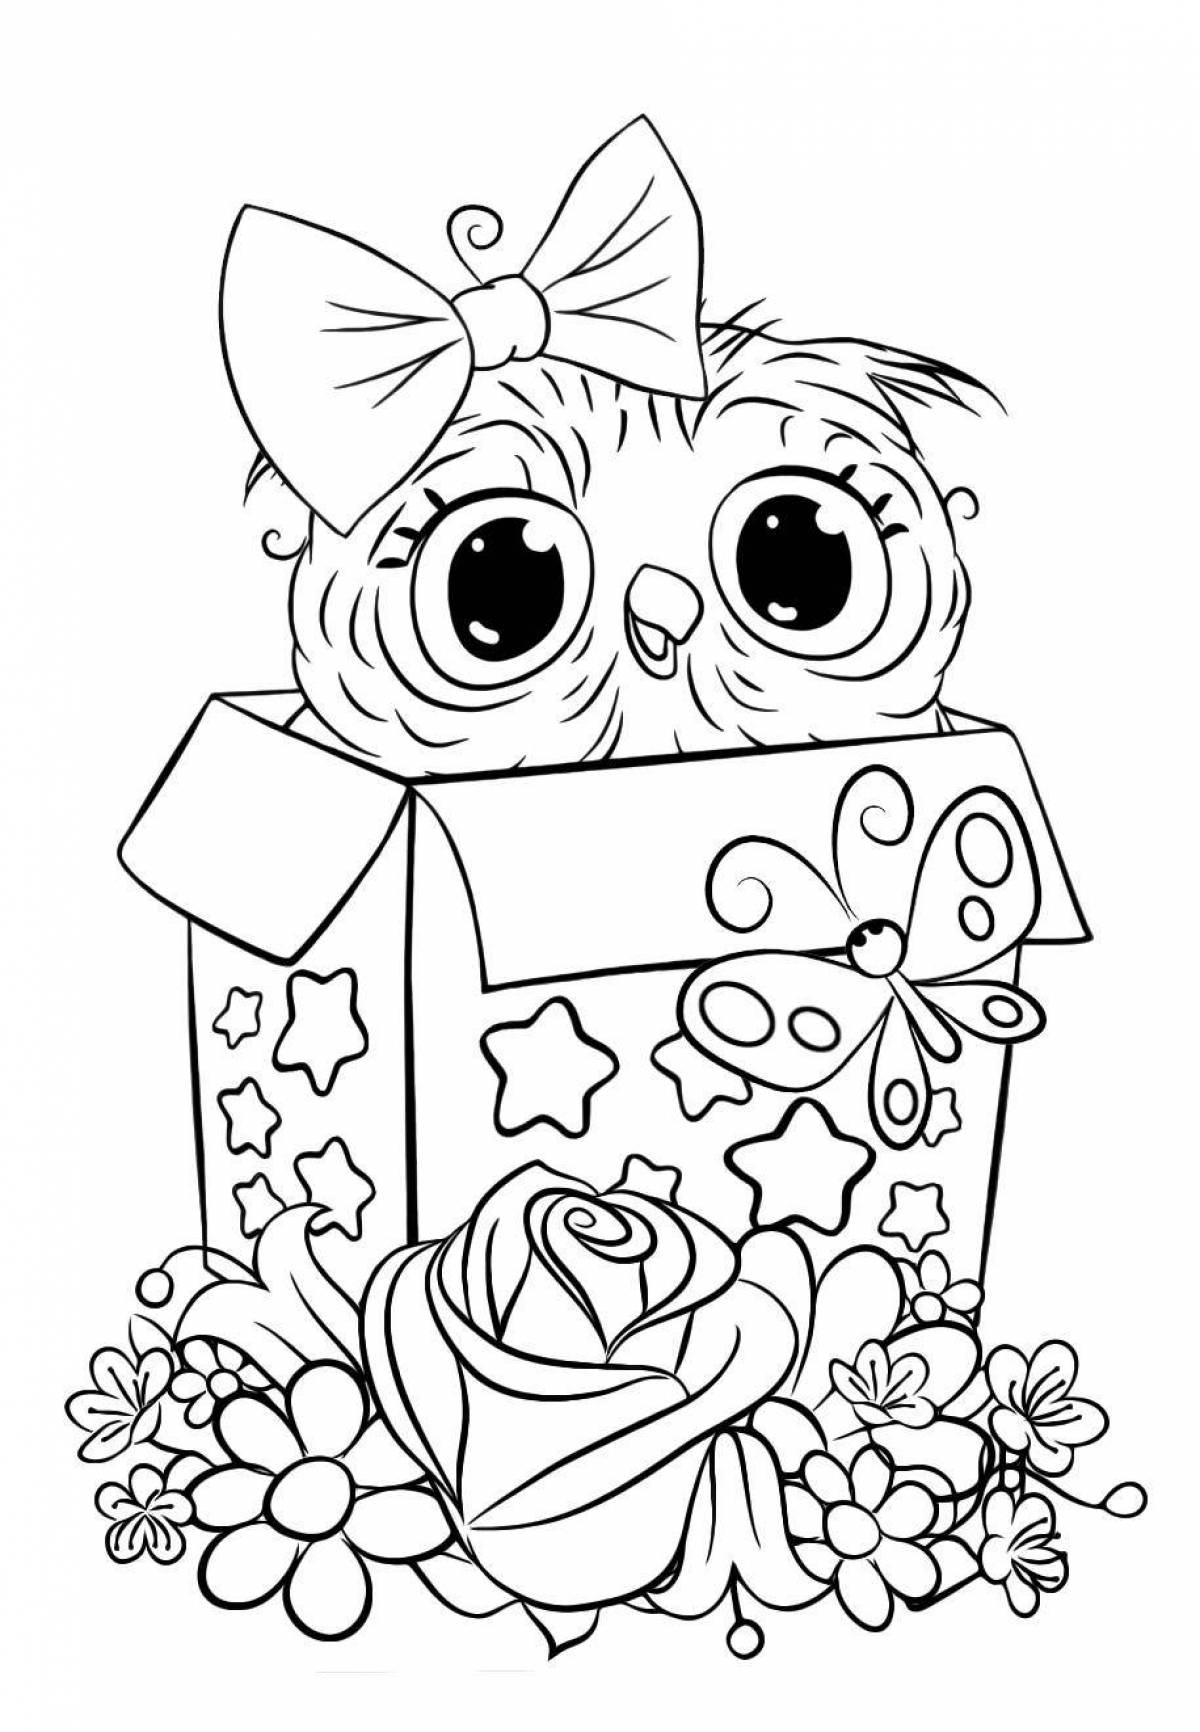 Unique owl coloring for girls